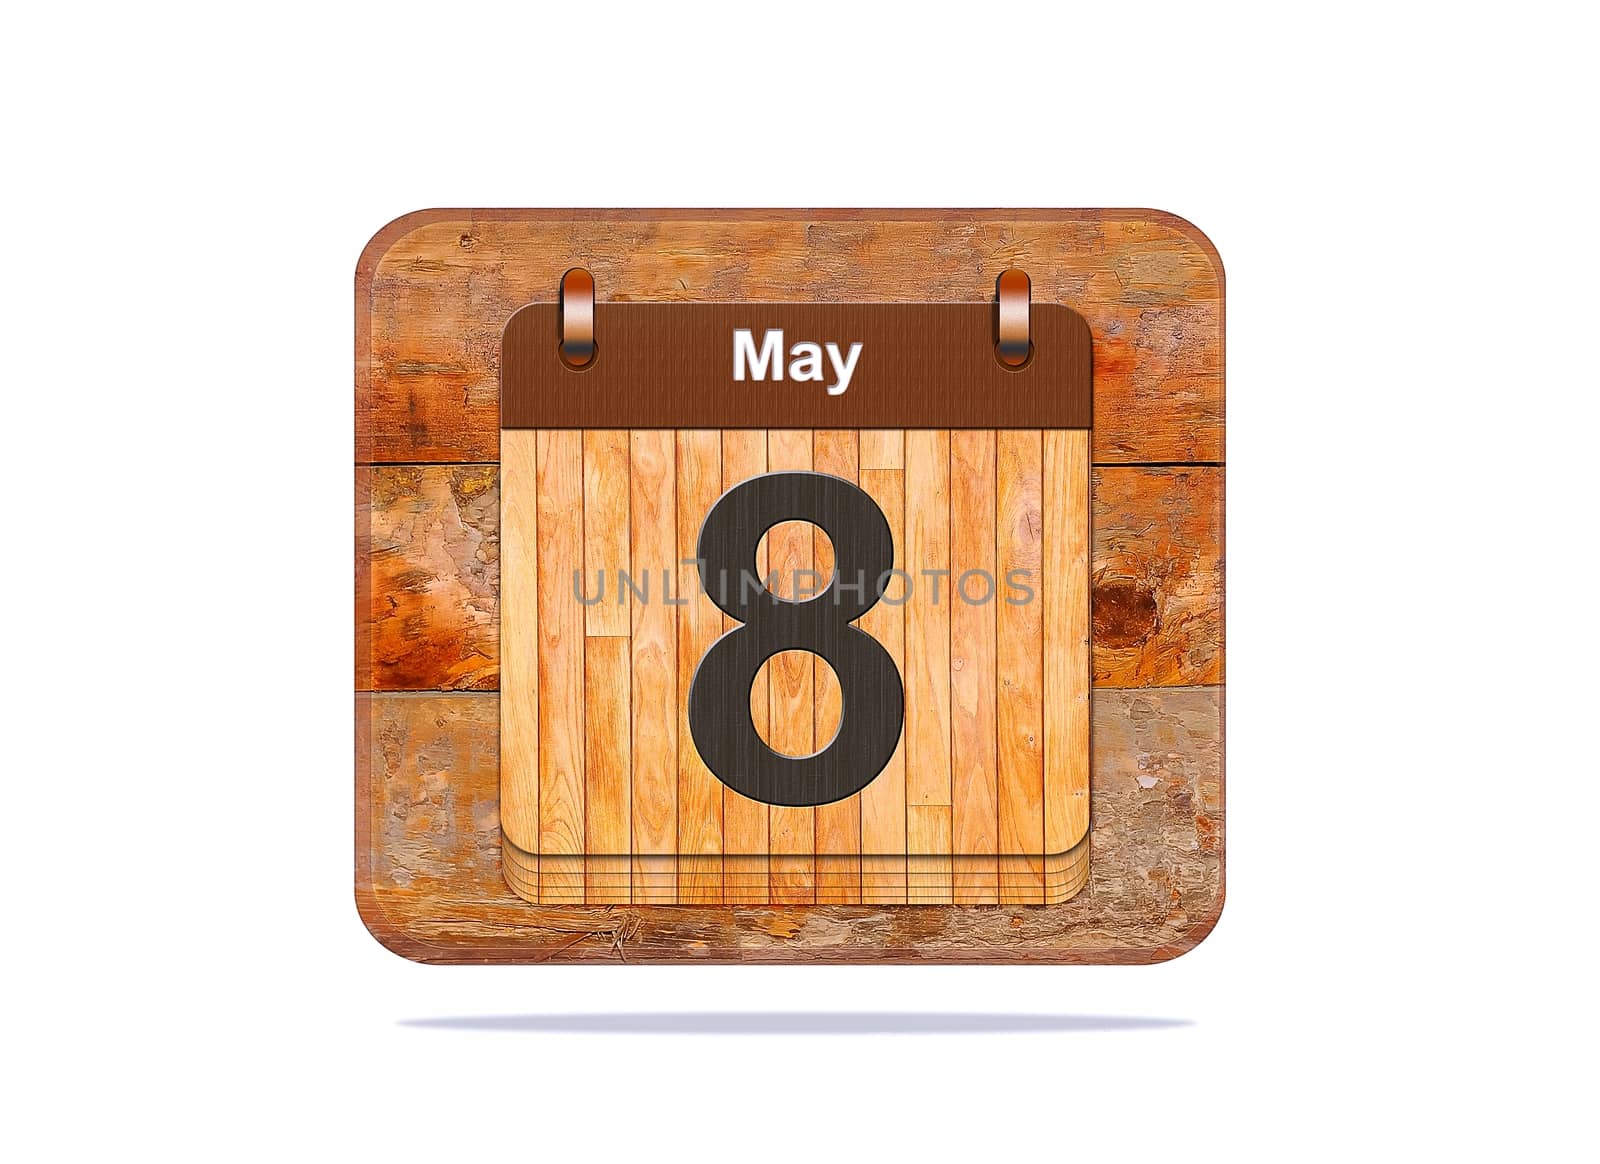 Calendar with the date of May 8.